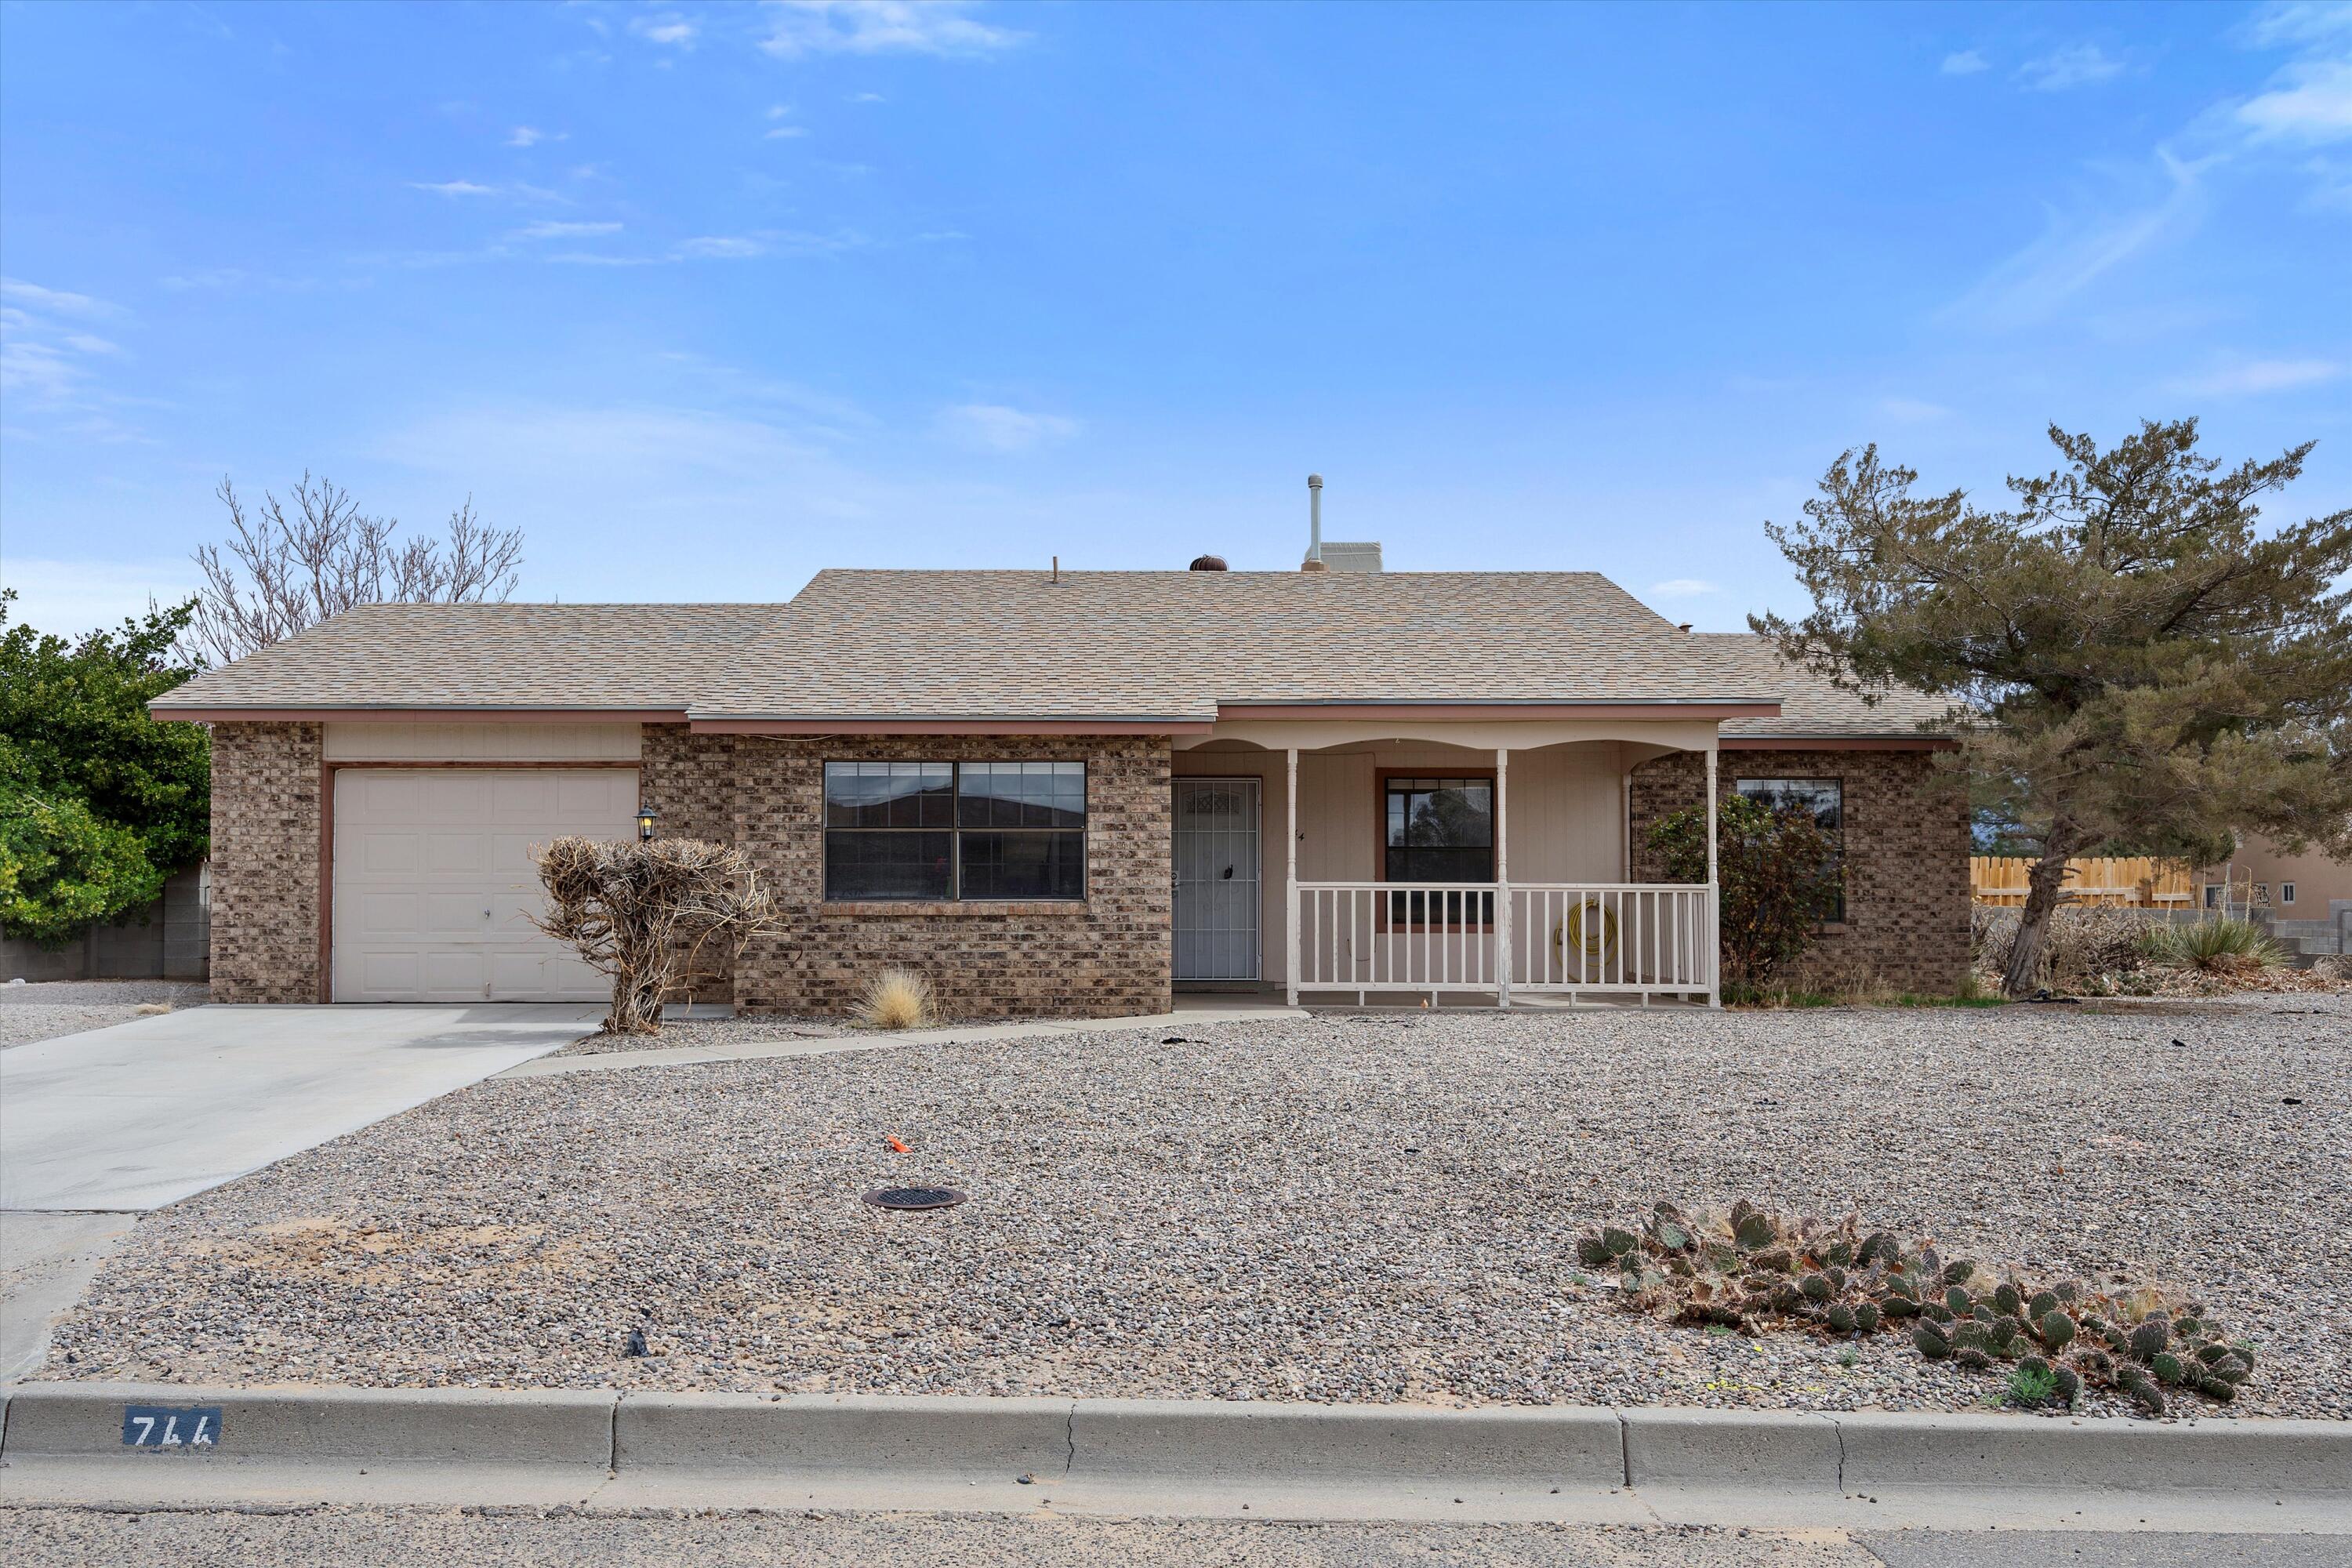 Great house on a corner lot, featuring views of the Sandias! Some updates include tile floors, kitchen cabinets, and bathrooms vanities. Do not miss your chance at this great home!